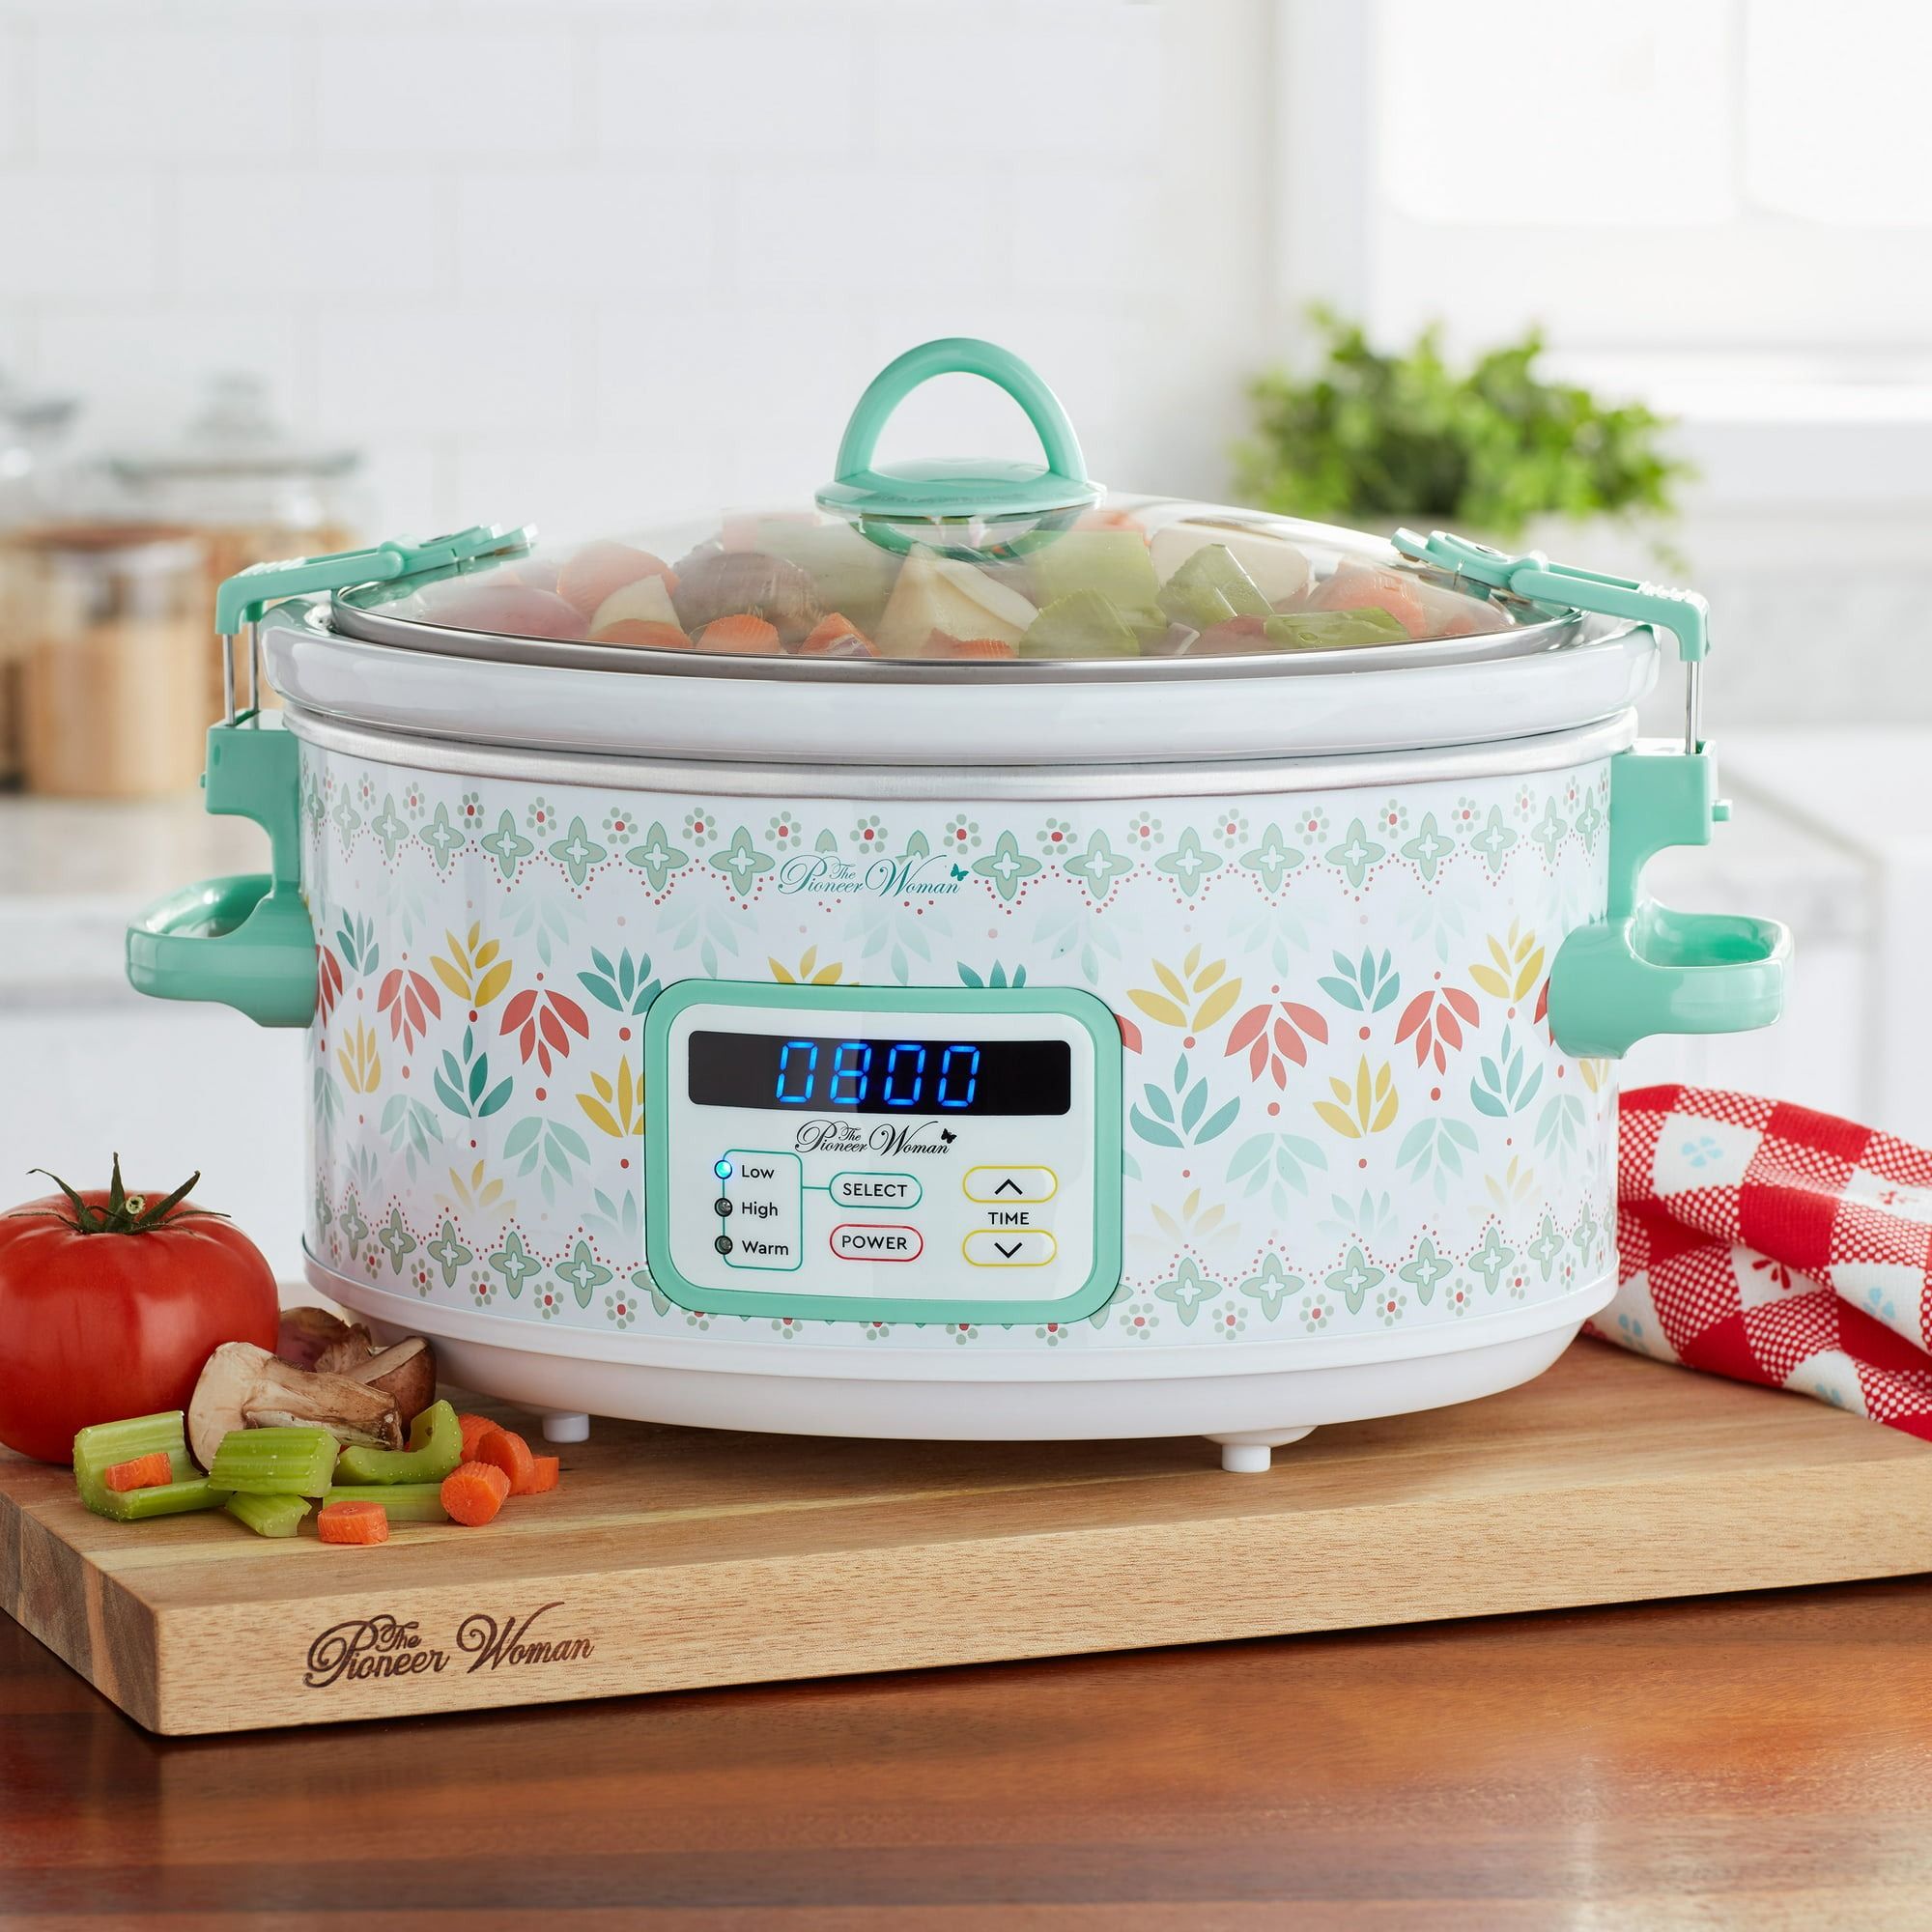 https://hips.hearstapps.com/hmg-prod/images/the-pioneer-woman-slow-cooker-65a7e31546b23.jpeg